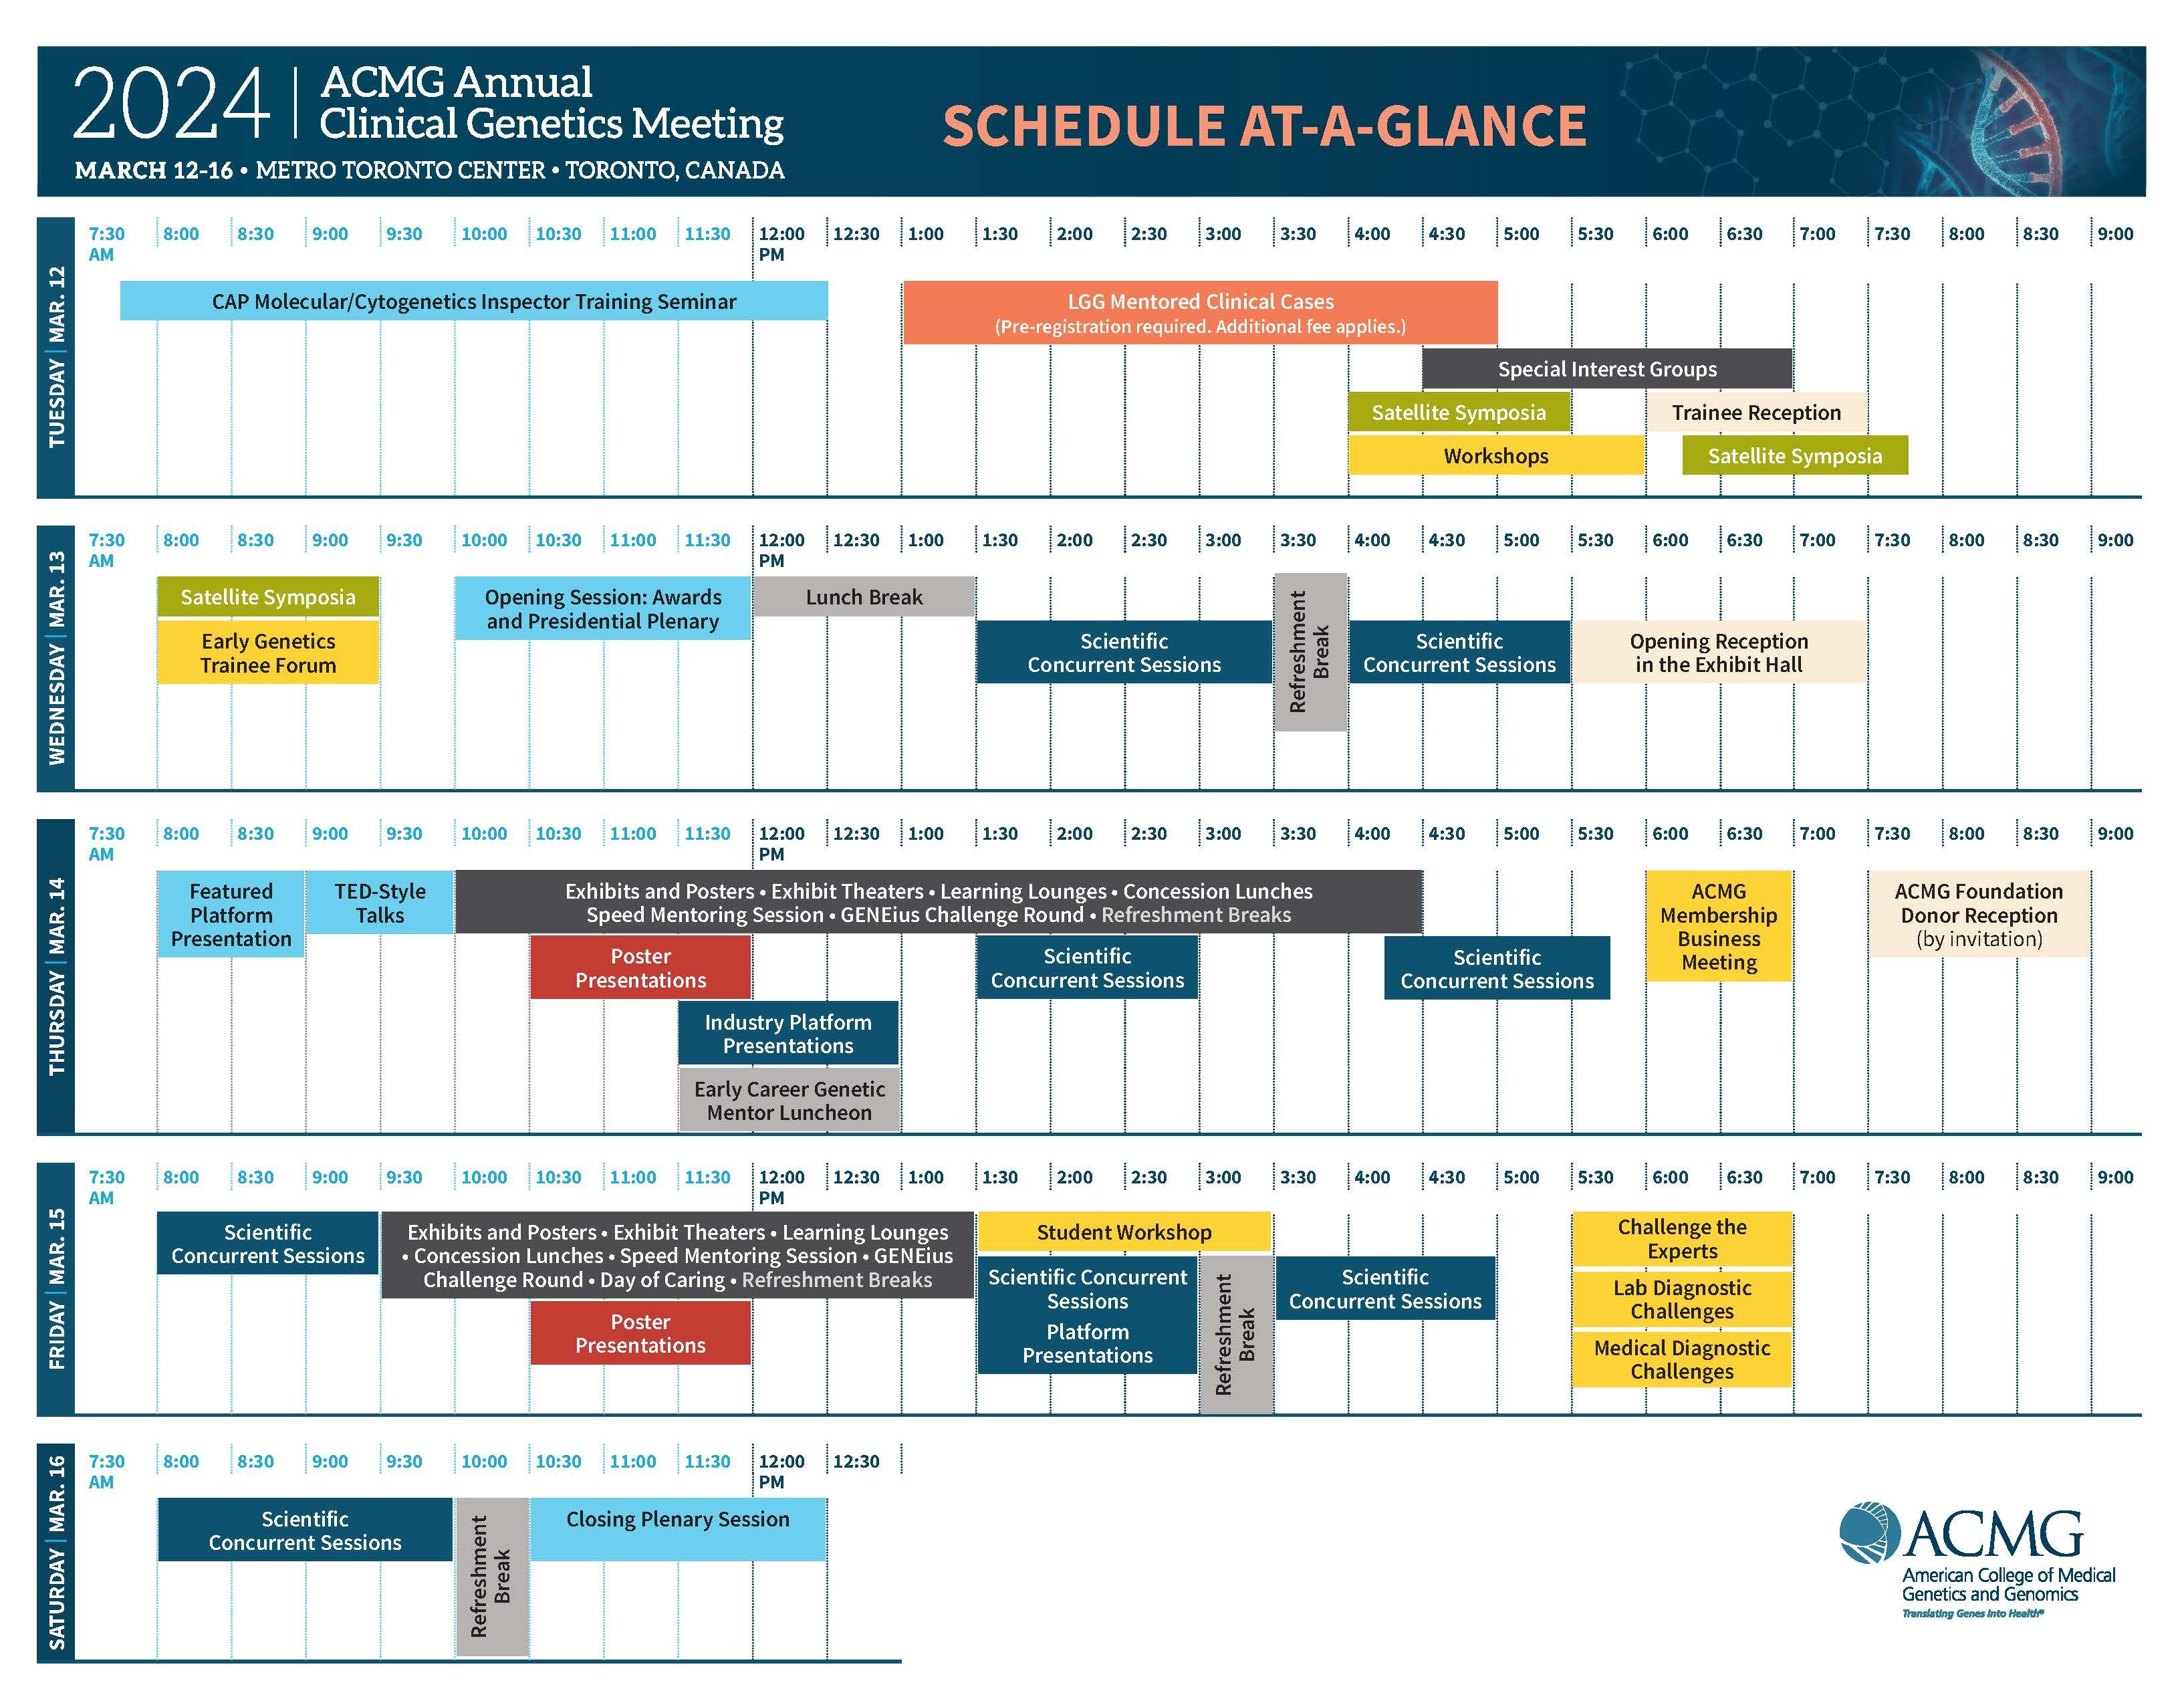 Schedule-at-a-glance